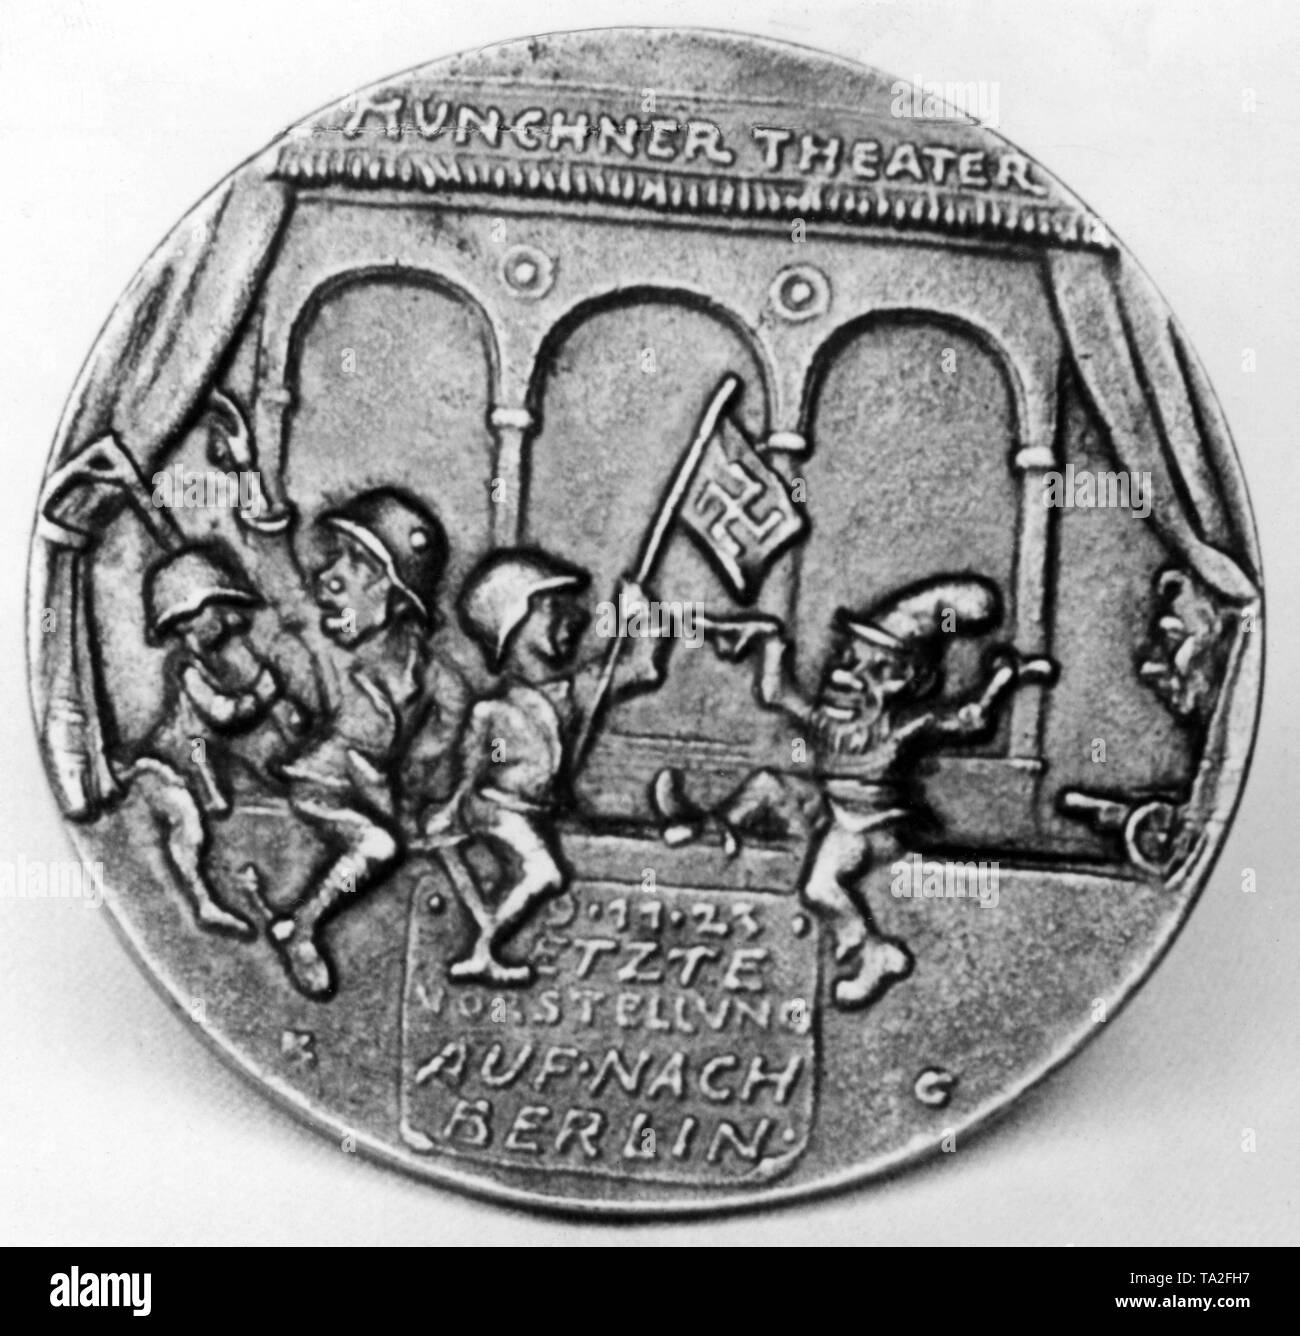 Back of a medal on the Beer Hall Putsch by Karl Goetz. The Beer Hall Putsch is depicted as the 'Munich Theater'. It shows Adolf Hitler (in the middle, with steel helmet) and two putschists with gallows and a swastika flag. On the right a Kasperl is dancing. Below the figures is the inscription: '9.11.23 Last performance, let's go to Berlin'. Stock Photo